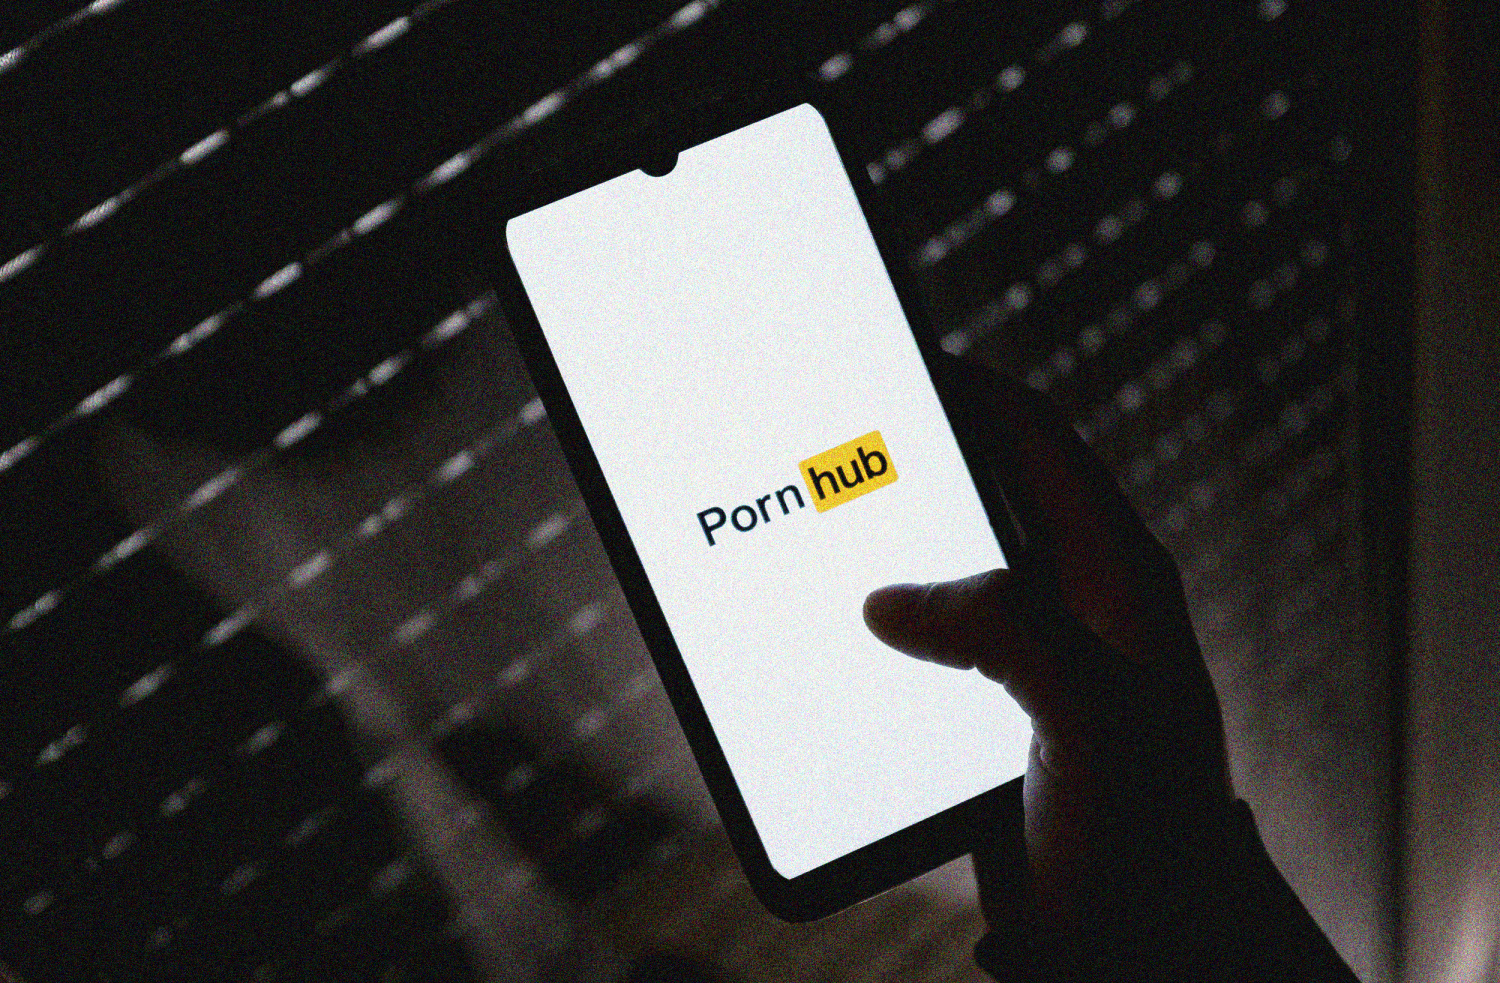 Meet Pornhubs new owner Ethical Capital Partners